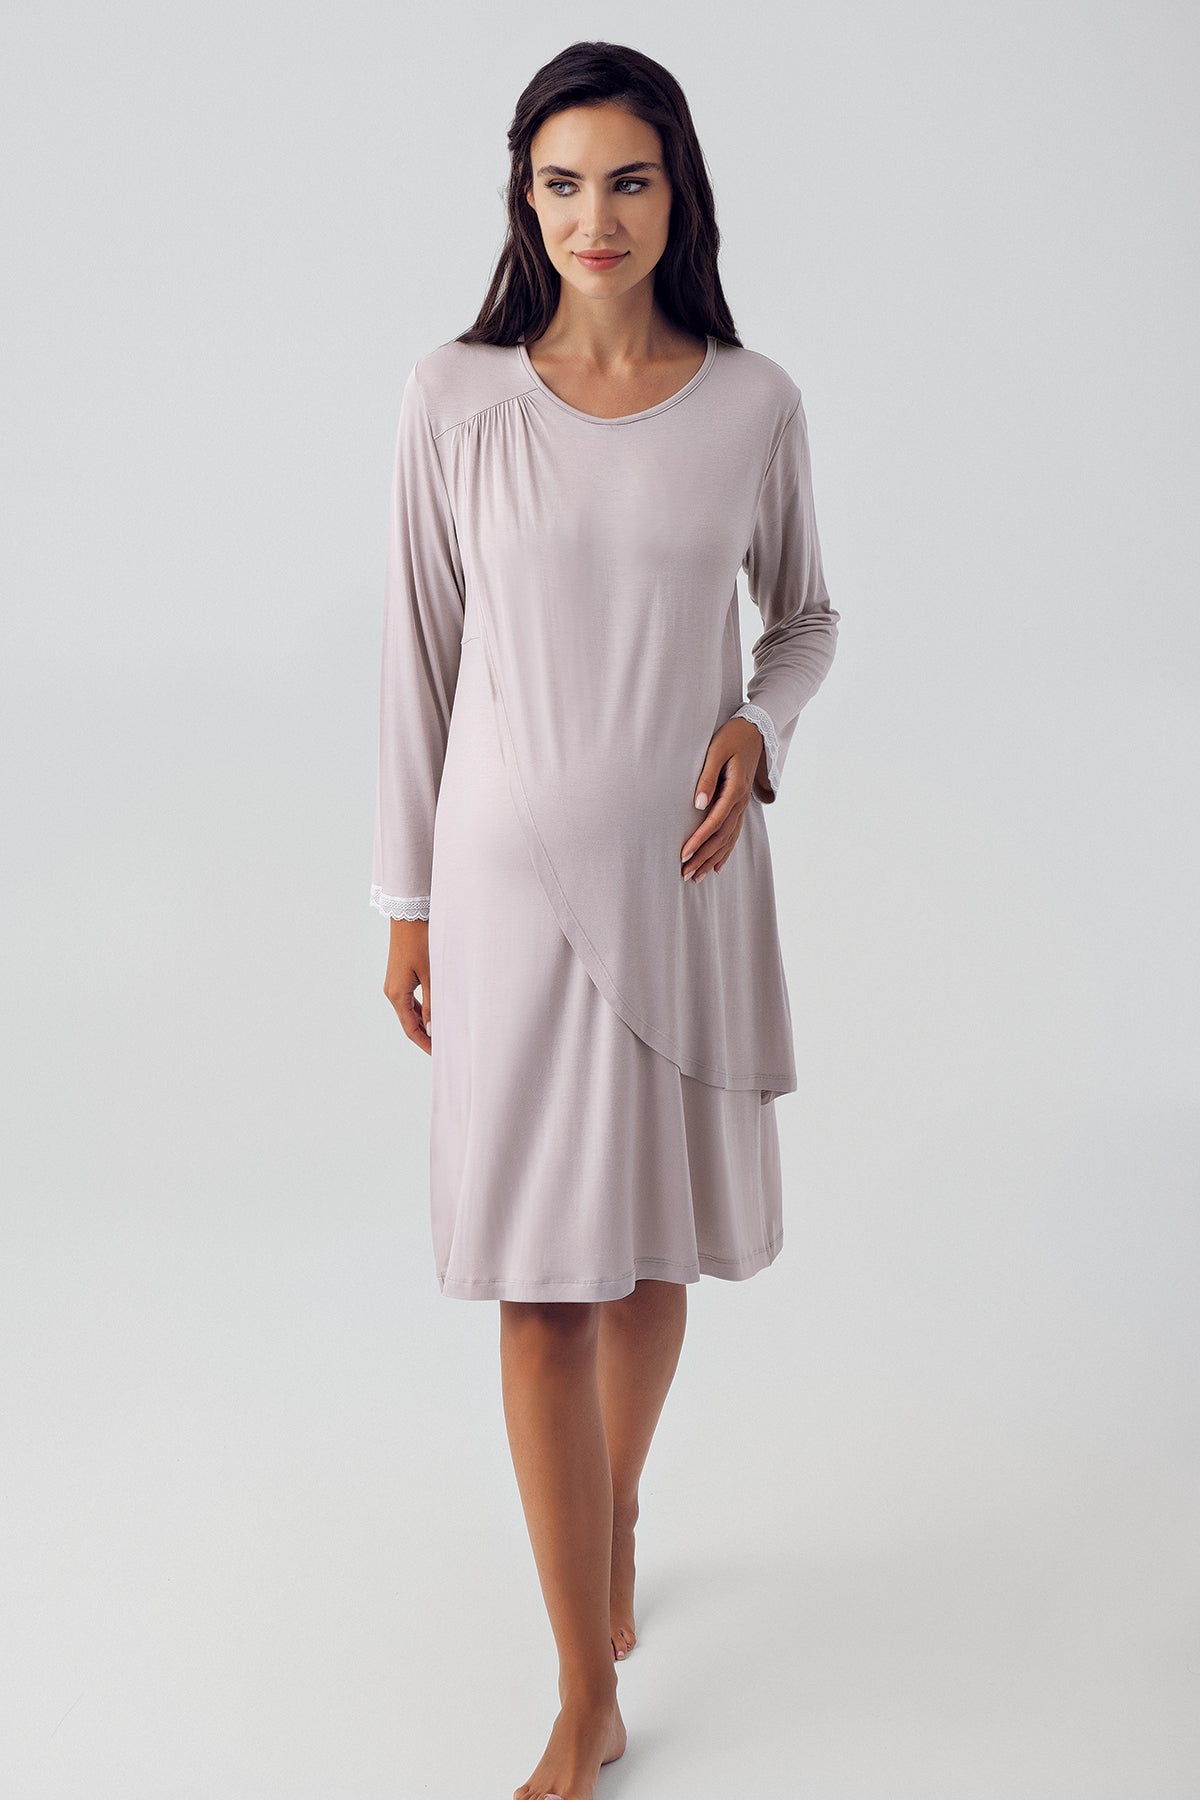 Shopymommy 15109 Wide Double Breasted Maternity & Nursing Nightgown Coffee